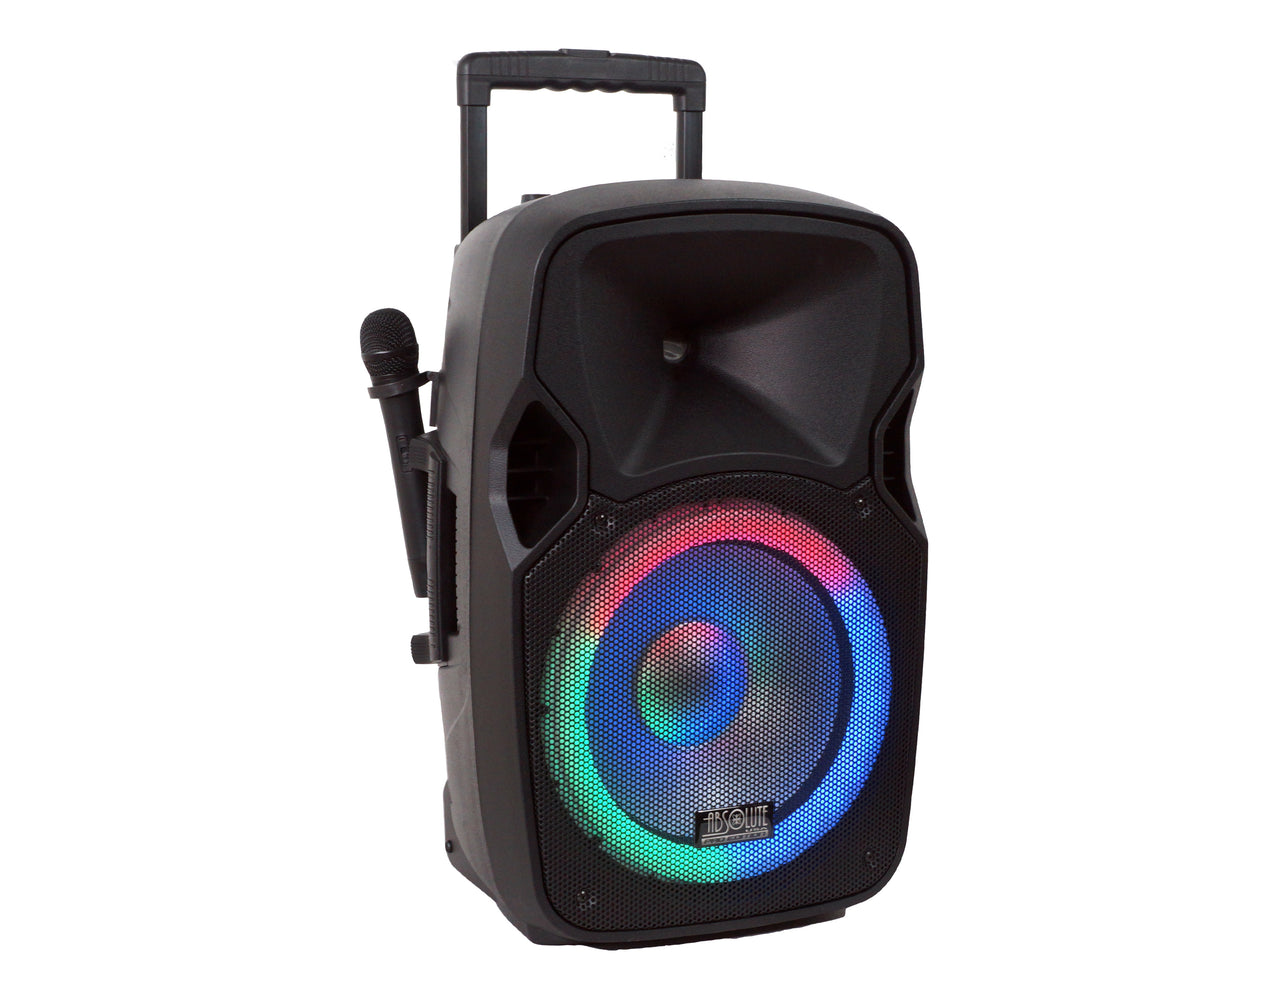 Absolute USPROBAT12 12" Portable Bluetooth PA Speaker System 3000W Rechargeable Outdoor Bluetooth Speaker Portable PA System w/ 2 Wireless Microphone, MP3 USB SD Card Reader, FM Radio, Rolling Wheels, Remote